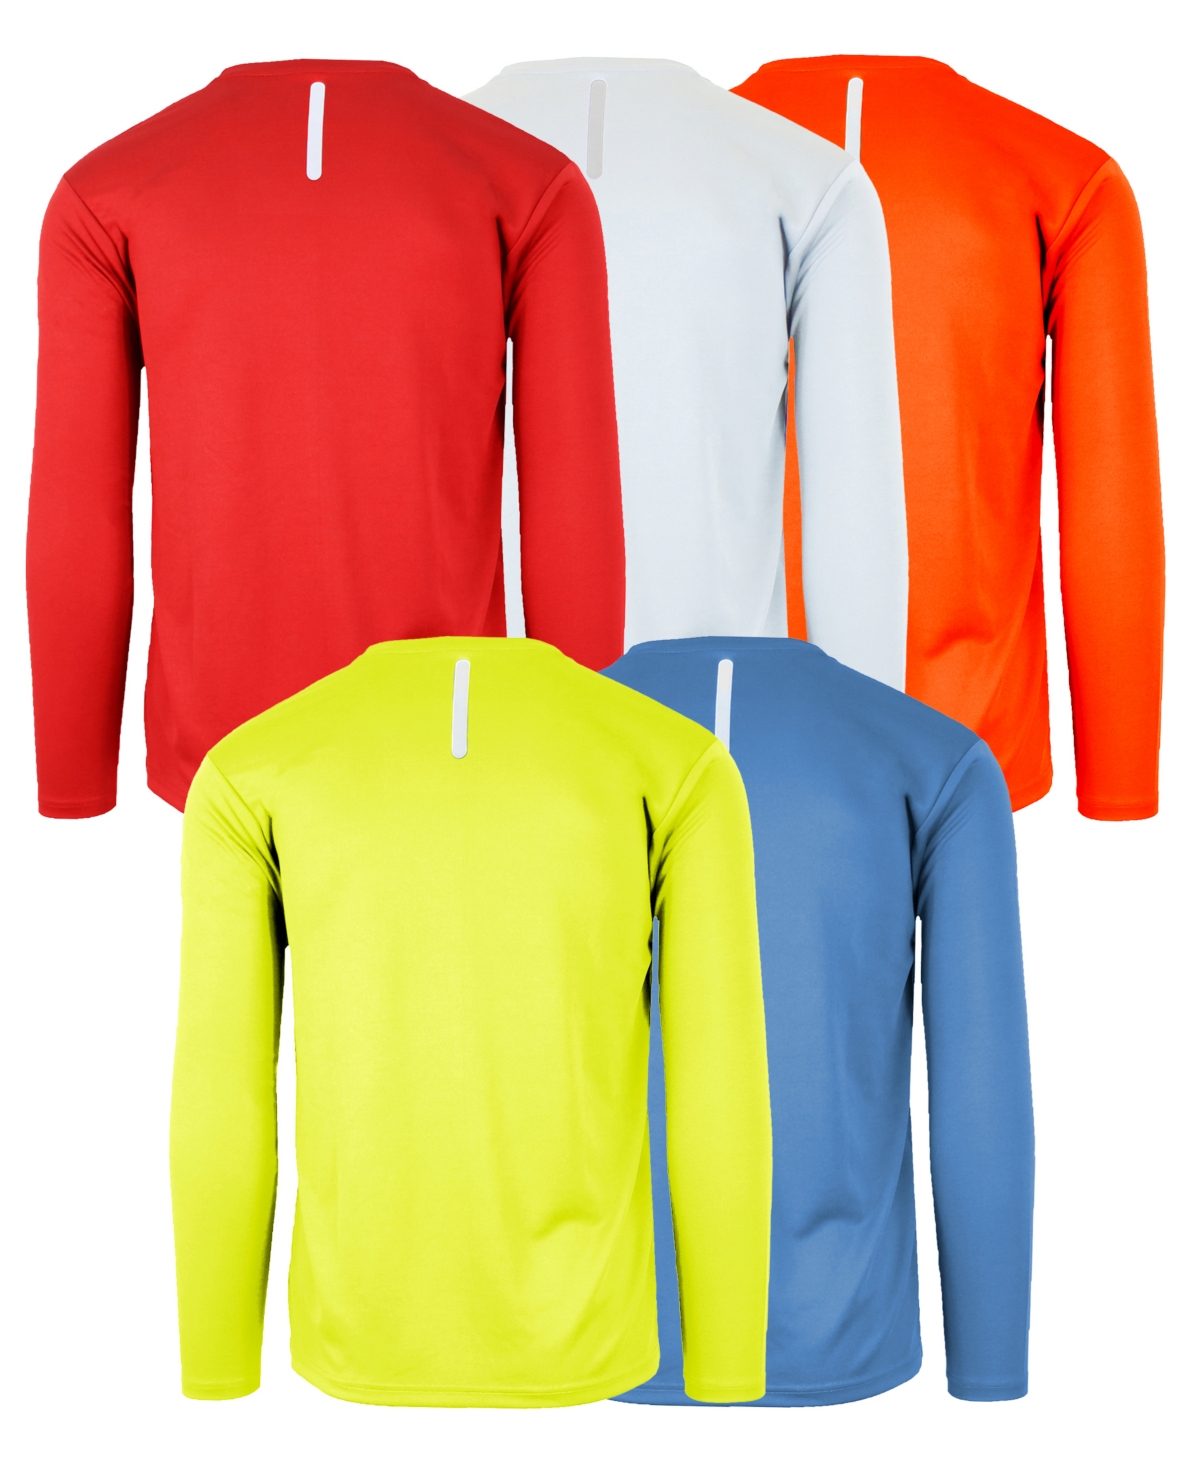 Shop Galaxy By Harvic Men's Long Sleeve Moisture-wicking Performance Crew Neck Tee -5 Pack In Red Multi